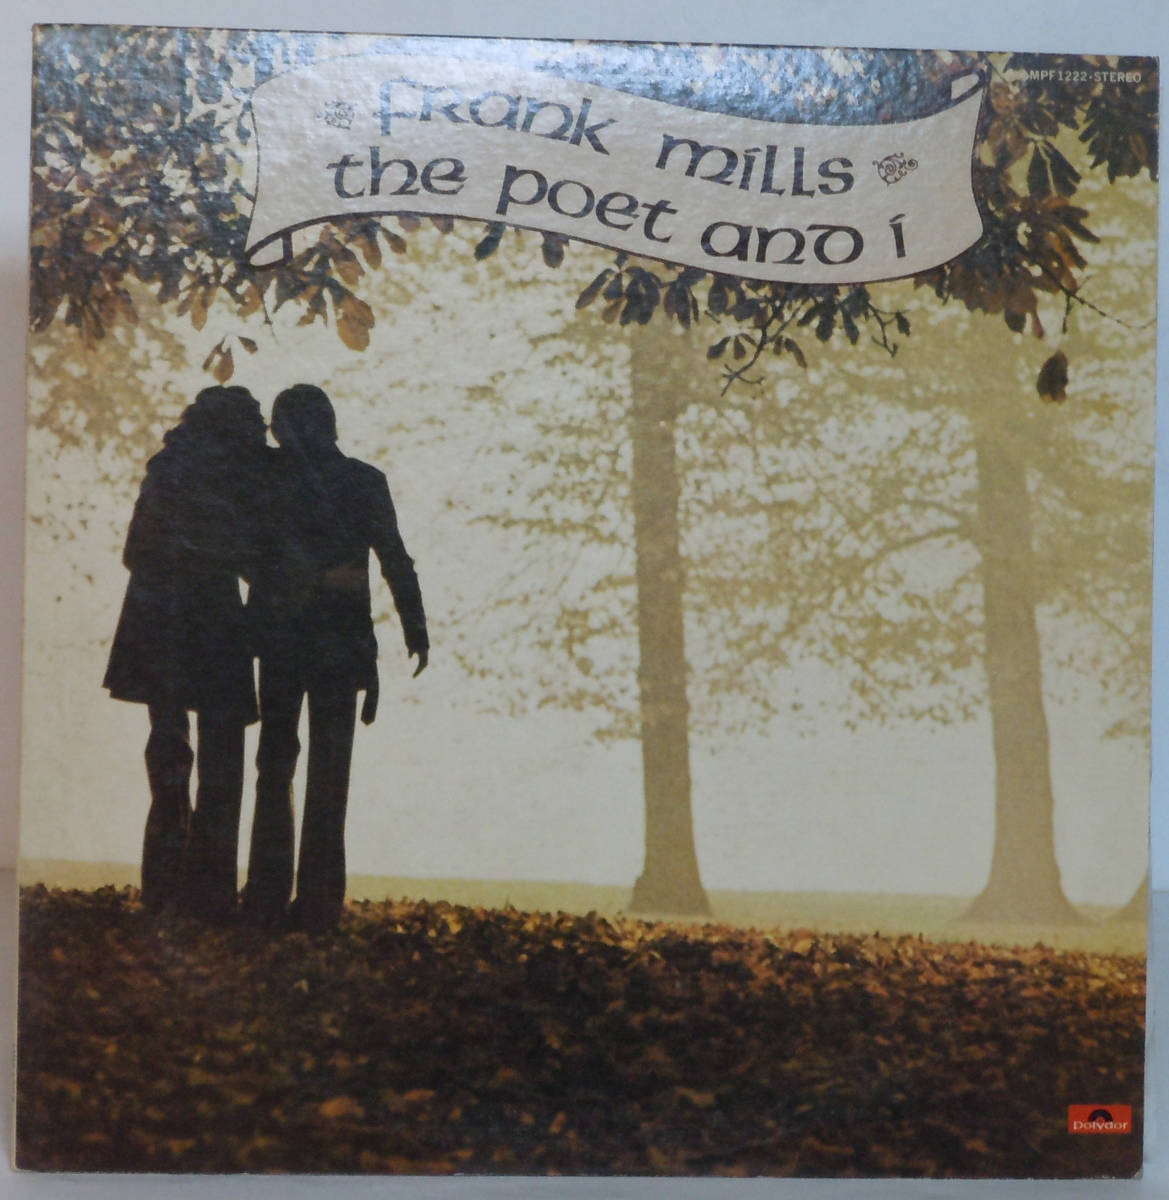 91216S 12LP★フランク・ミルズ/FRANK MILLS/THE POET AND I★MPF 1222 _画像1